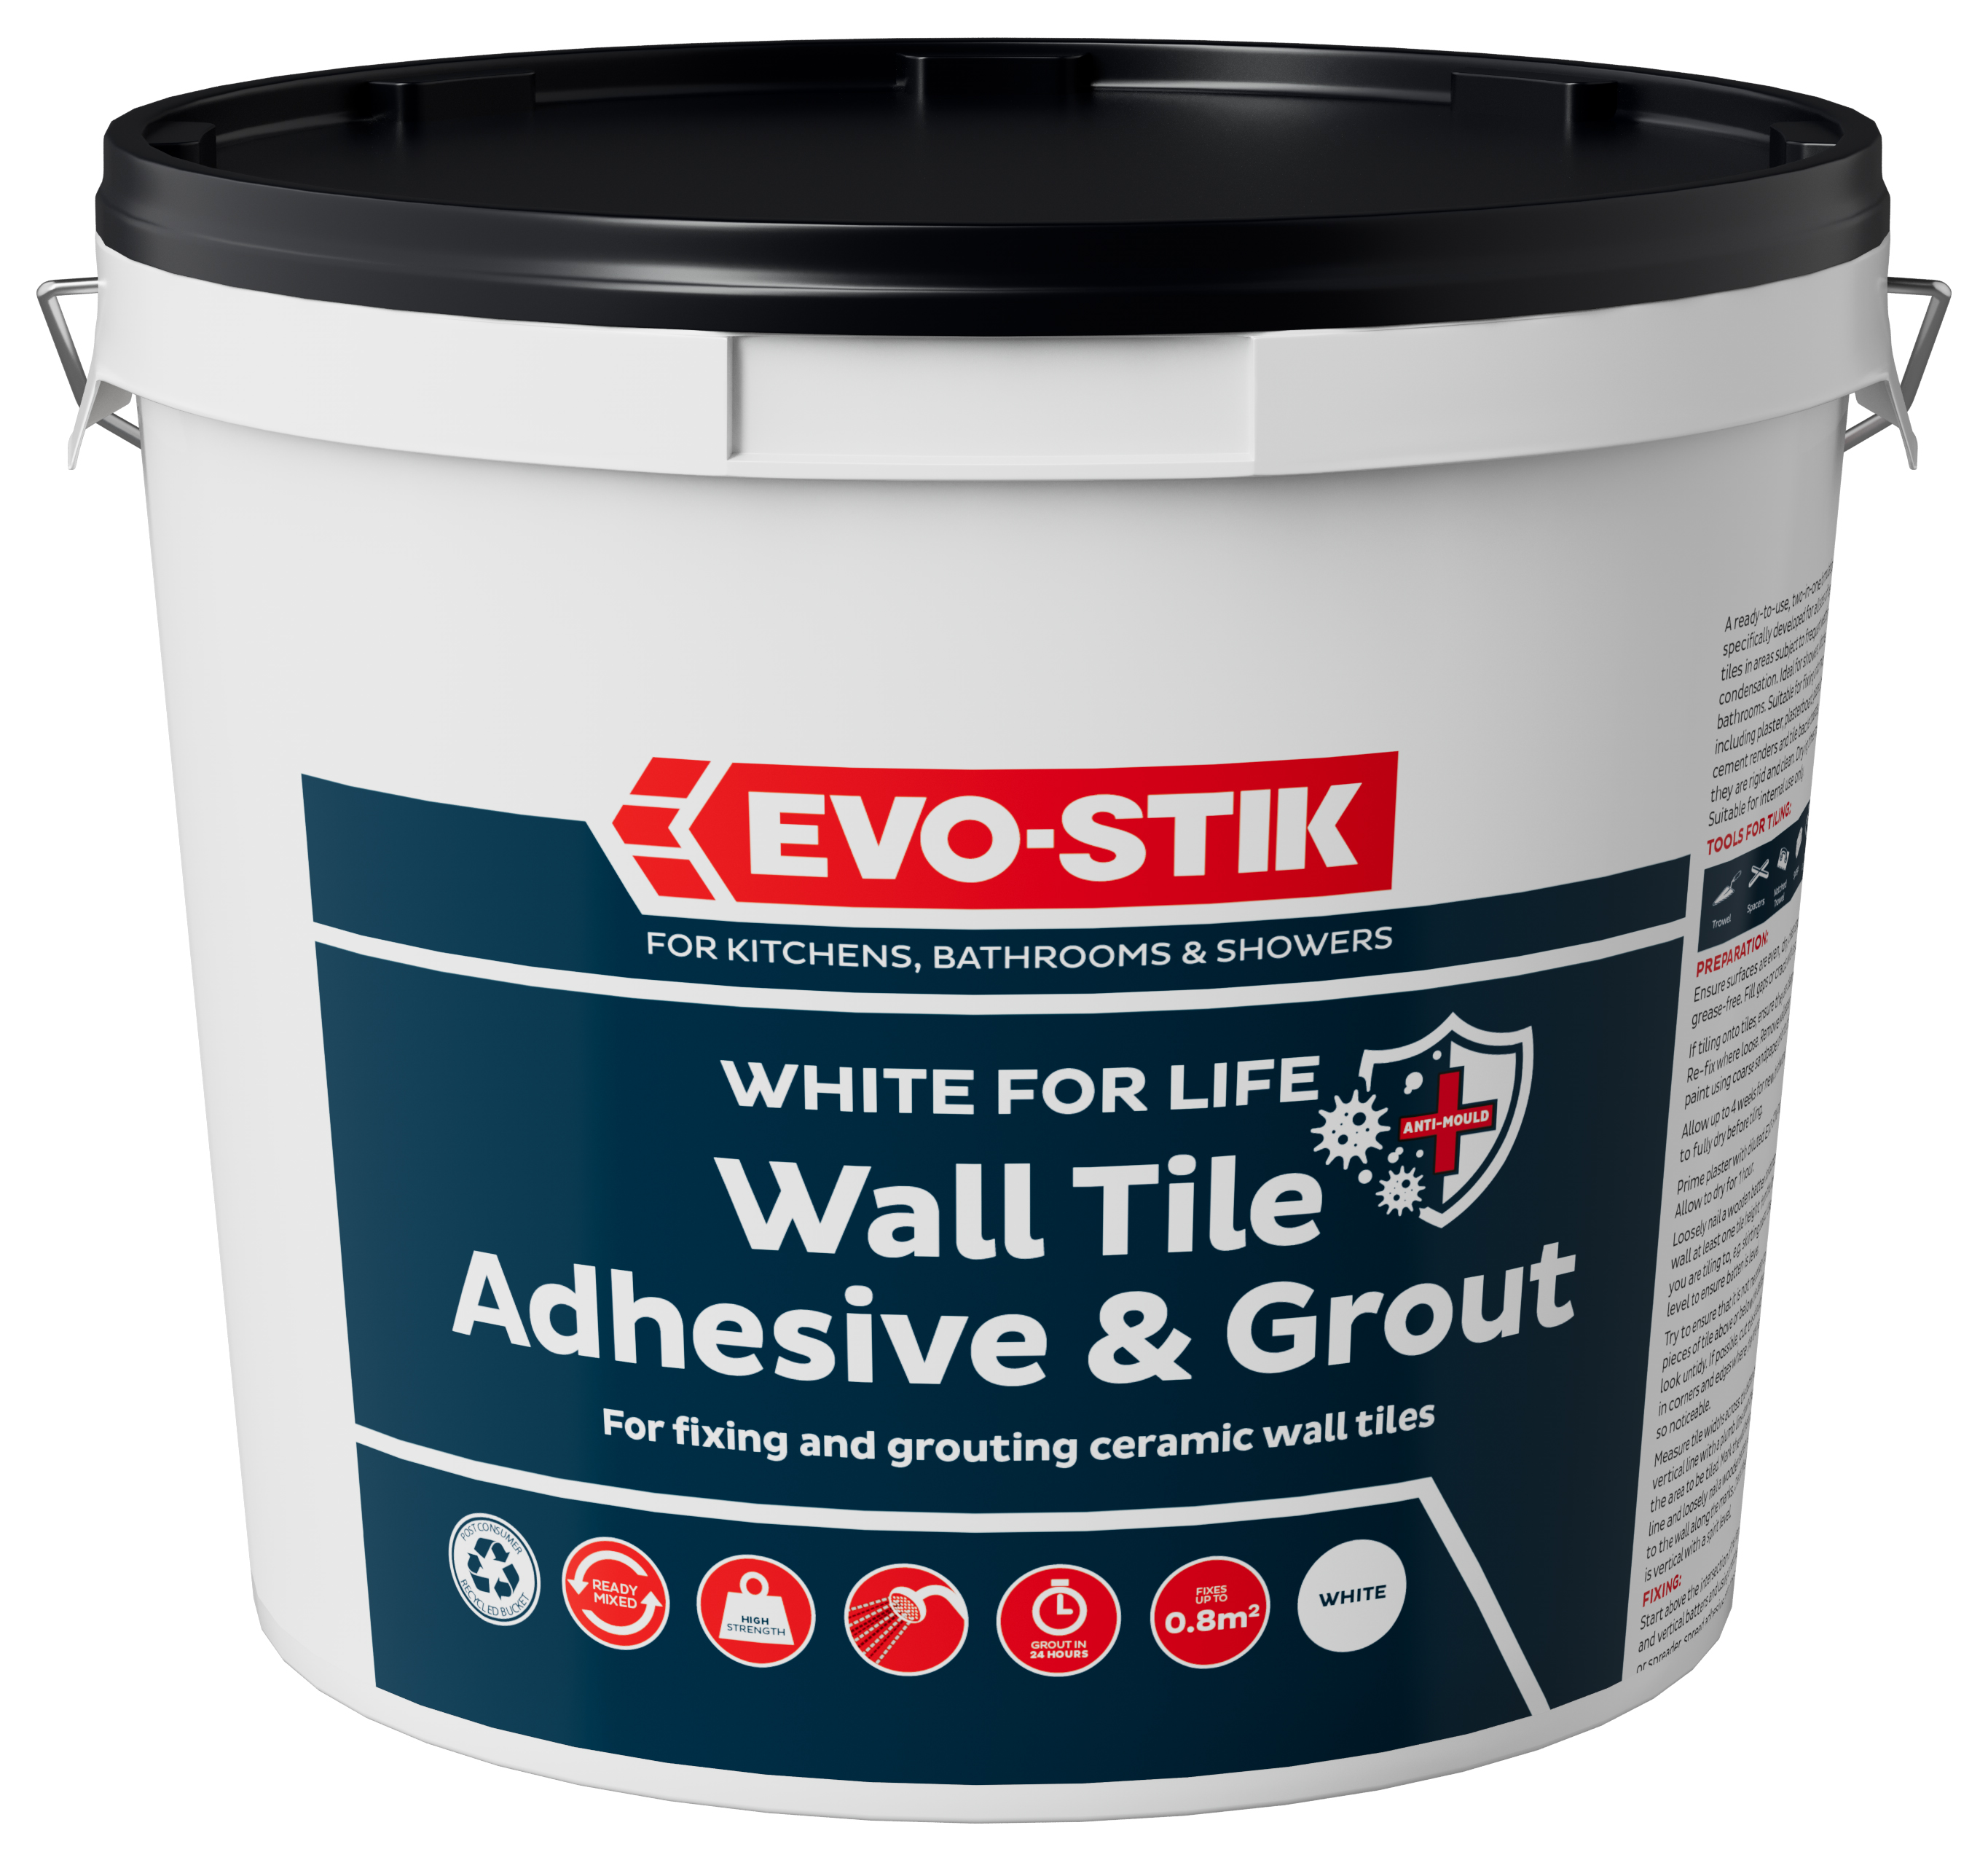 Image of EVO-STIK 1L White for Life Wall Tile Adhesive & Grout - White